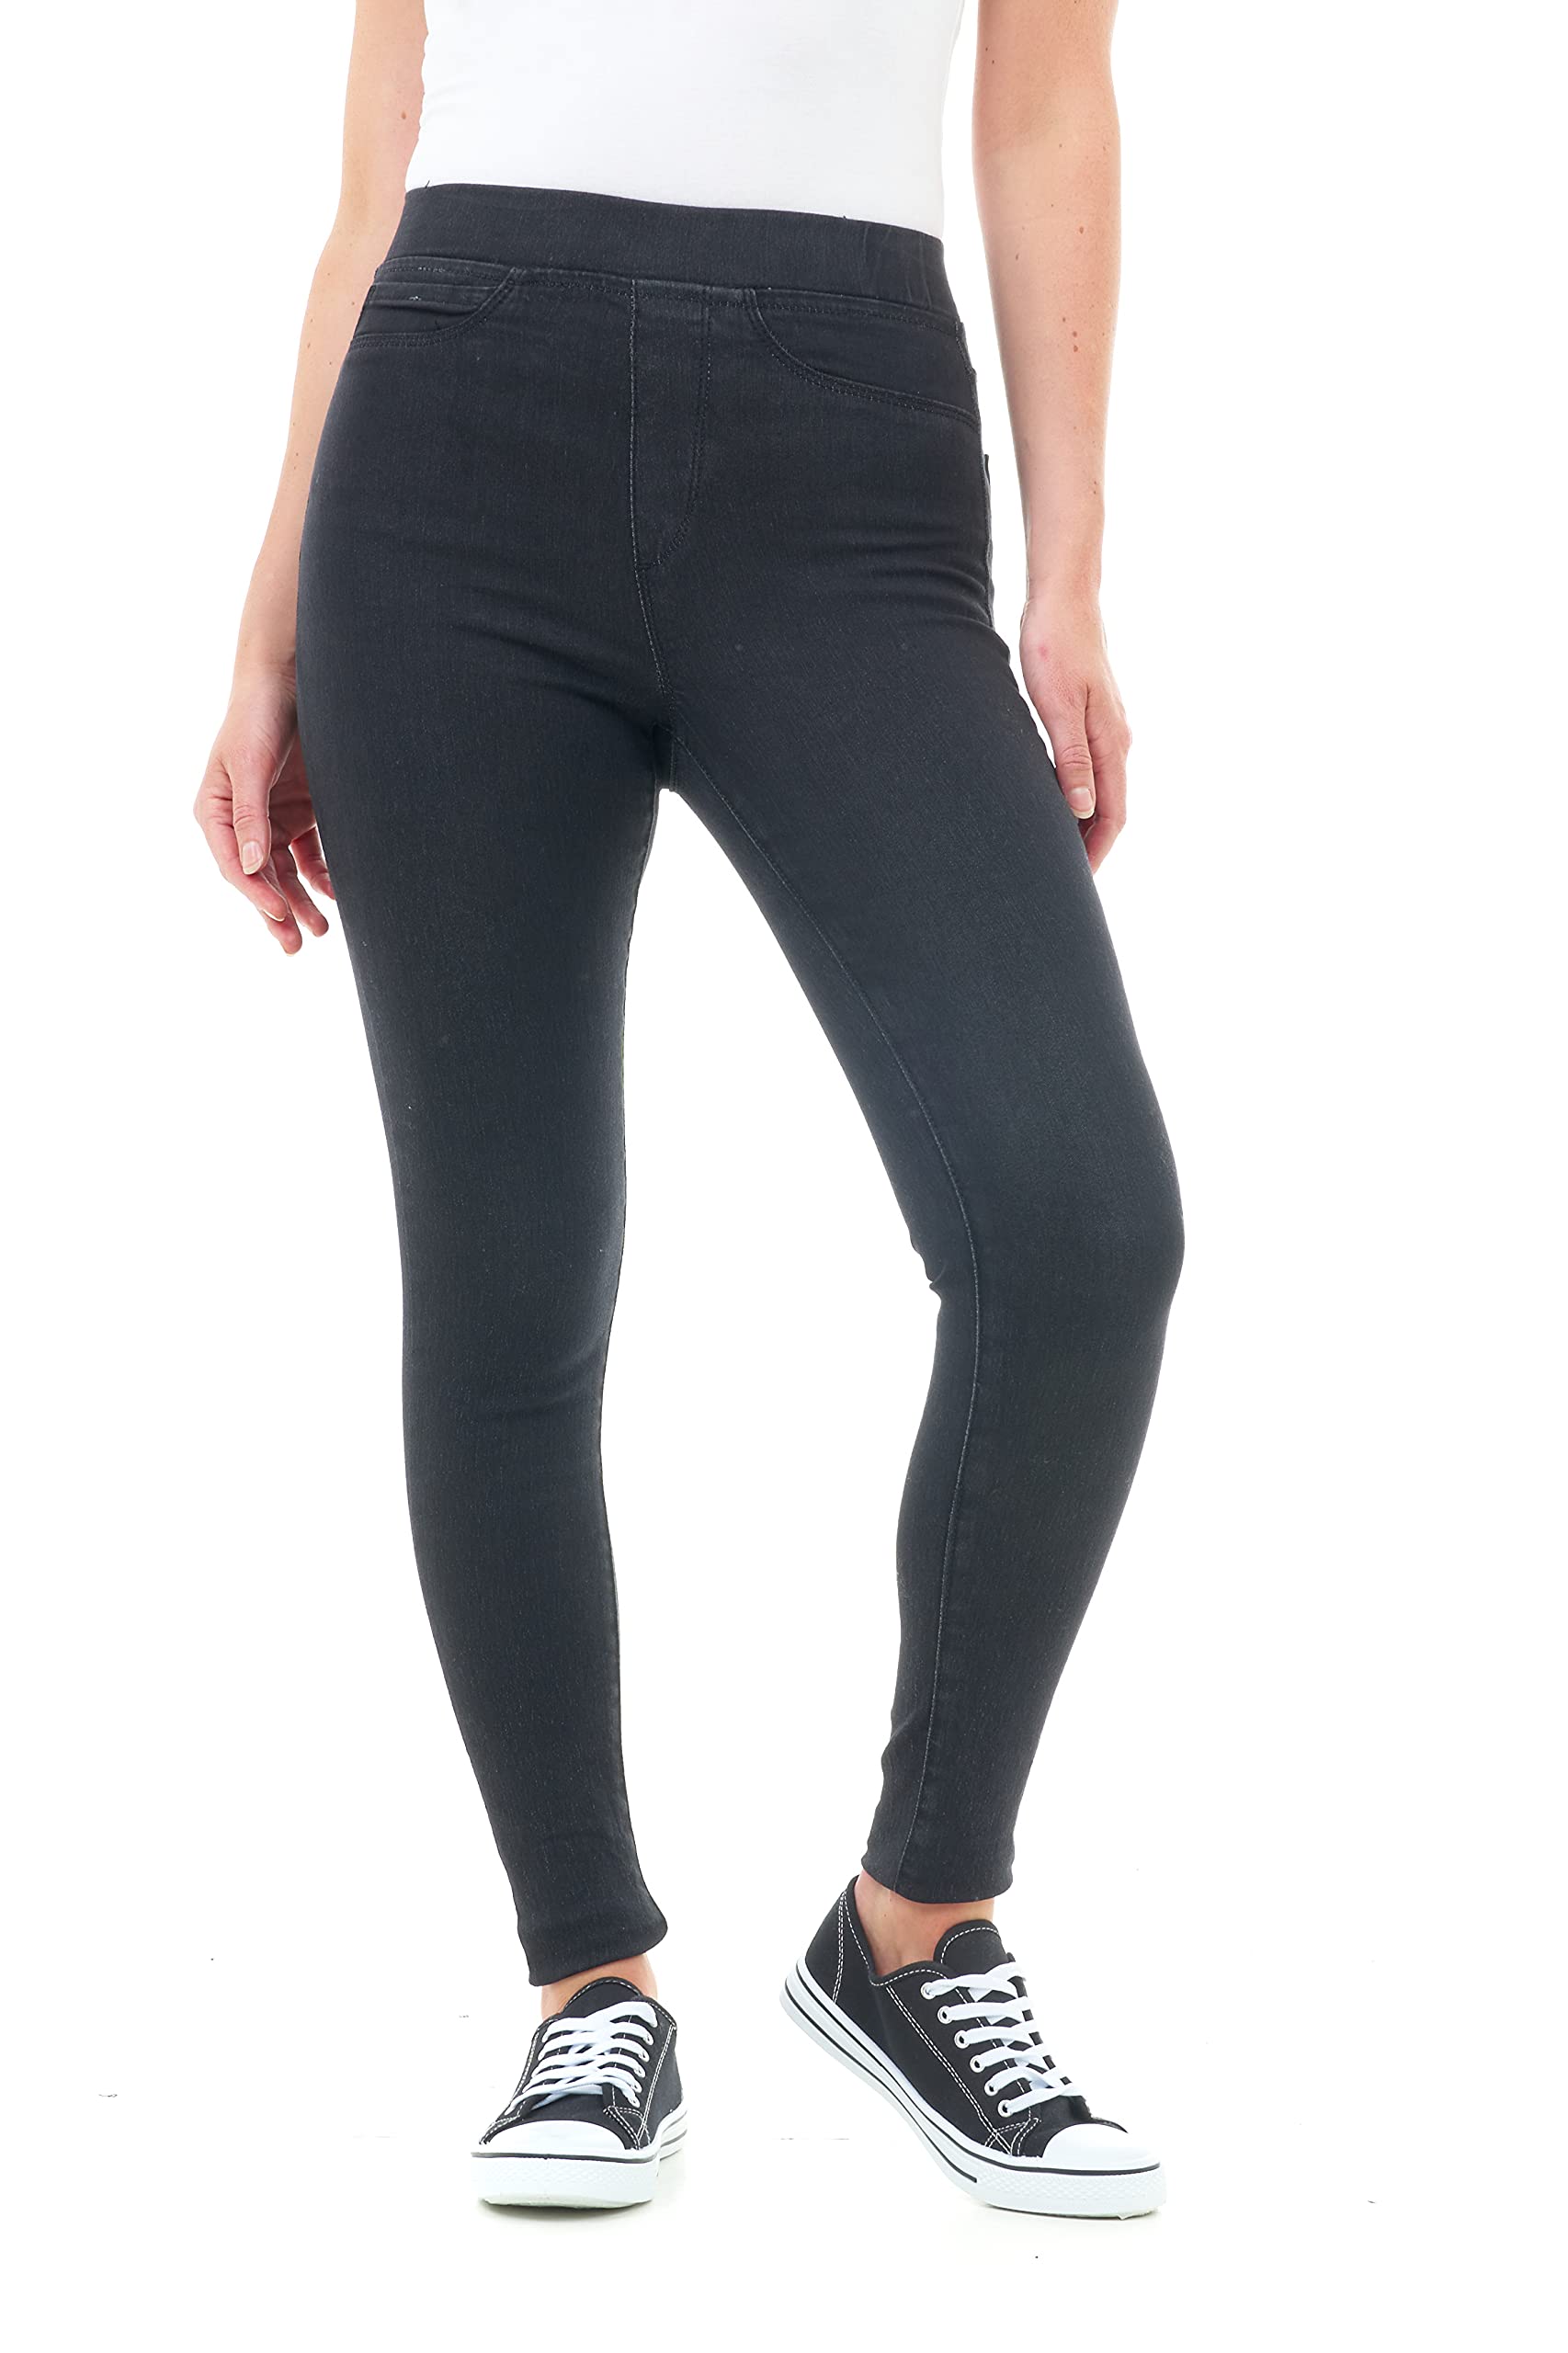 Combo Of 2 Women's Black And White Jegging at Rs 727.00, Jeggings